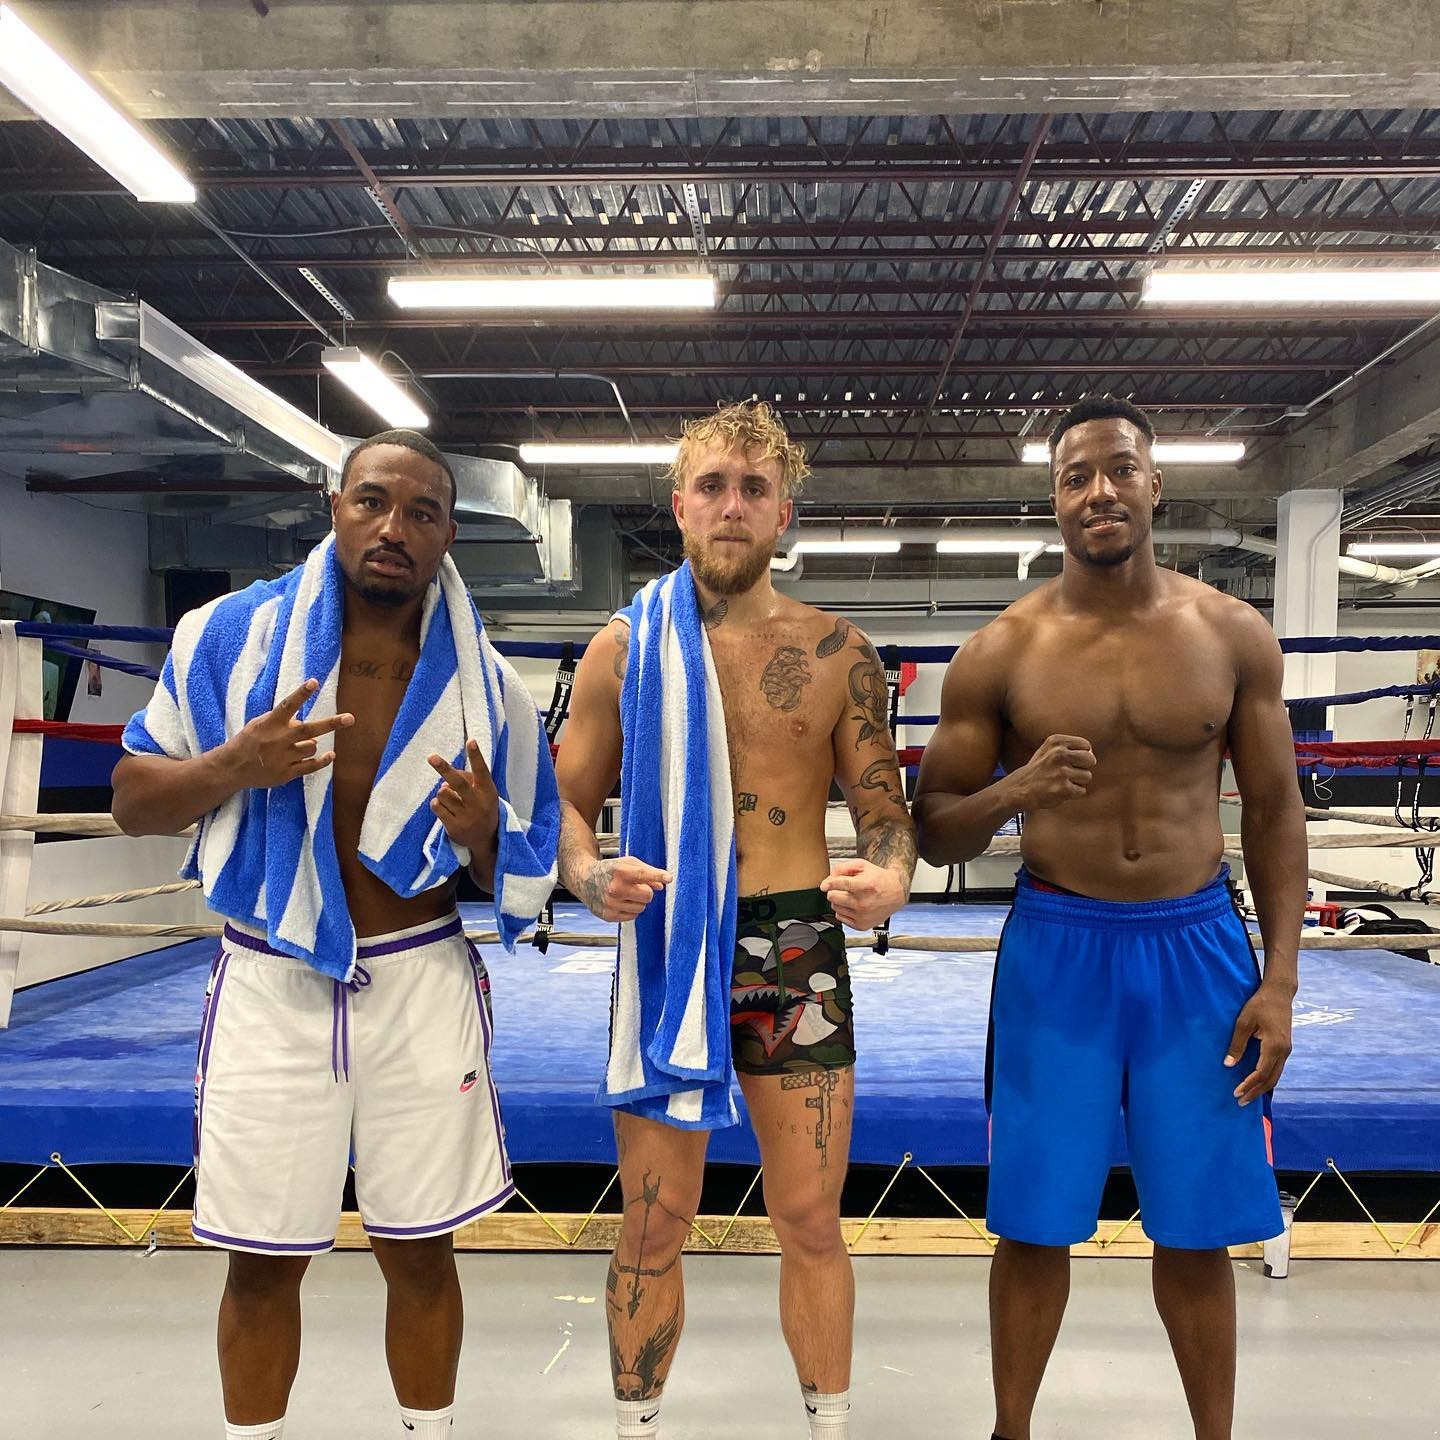 , KSI has a ‘HARDER’ punch than YouTube boxing rival Jake Paul, reveals sparring partner who has boxed BOTH